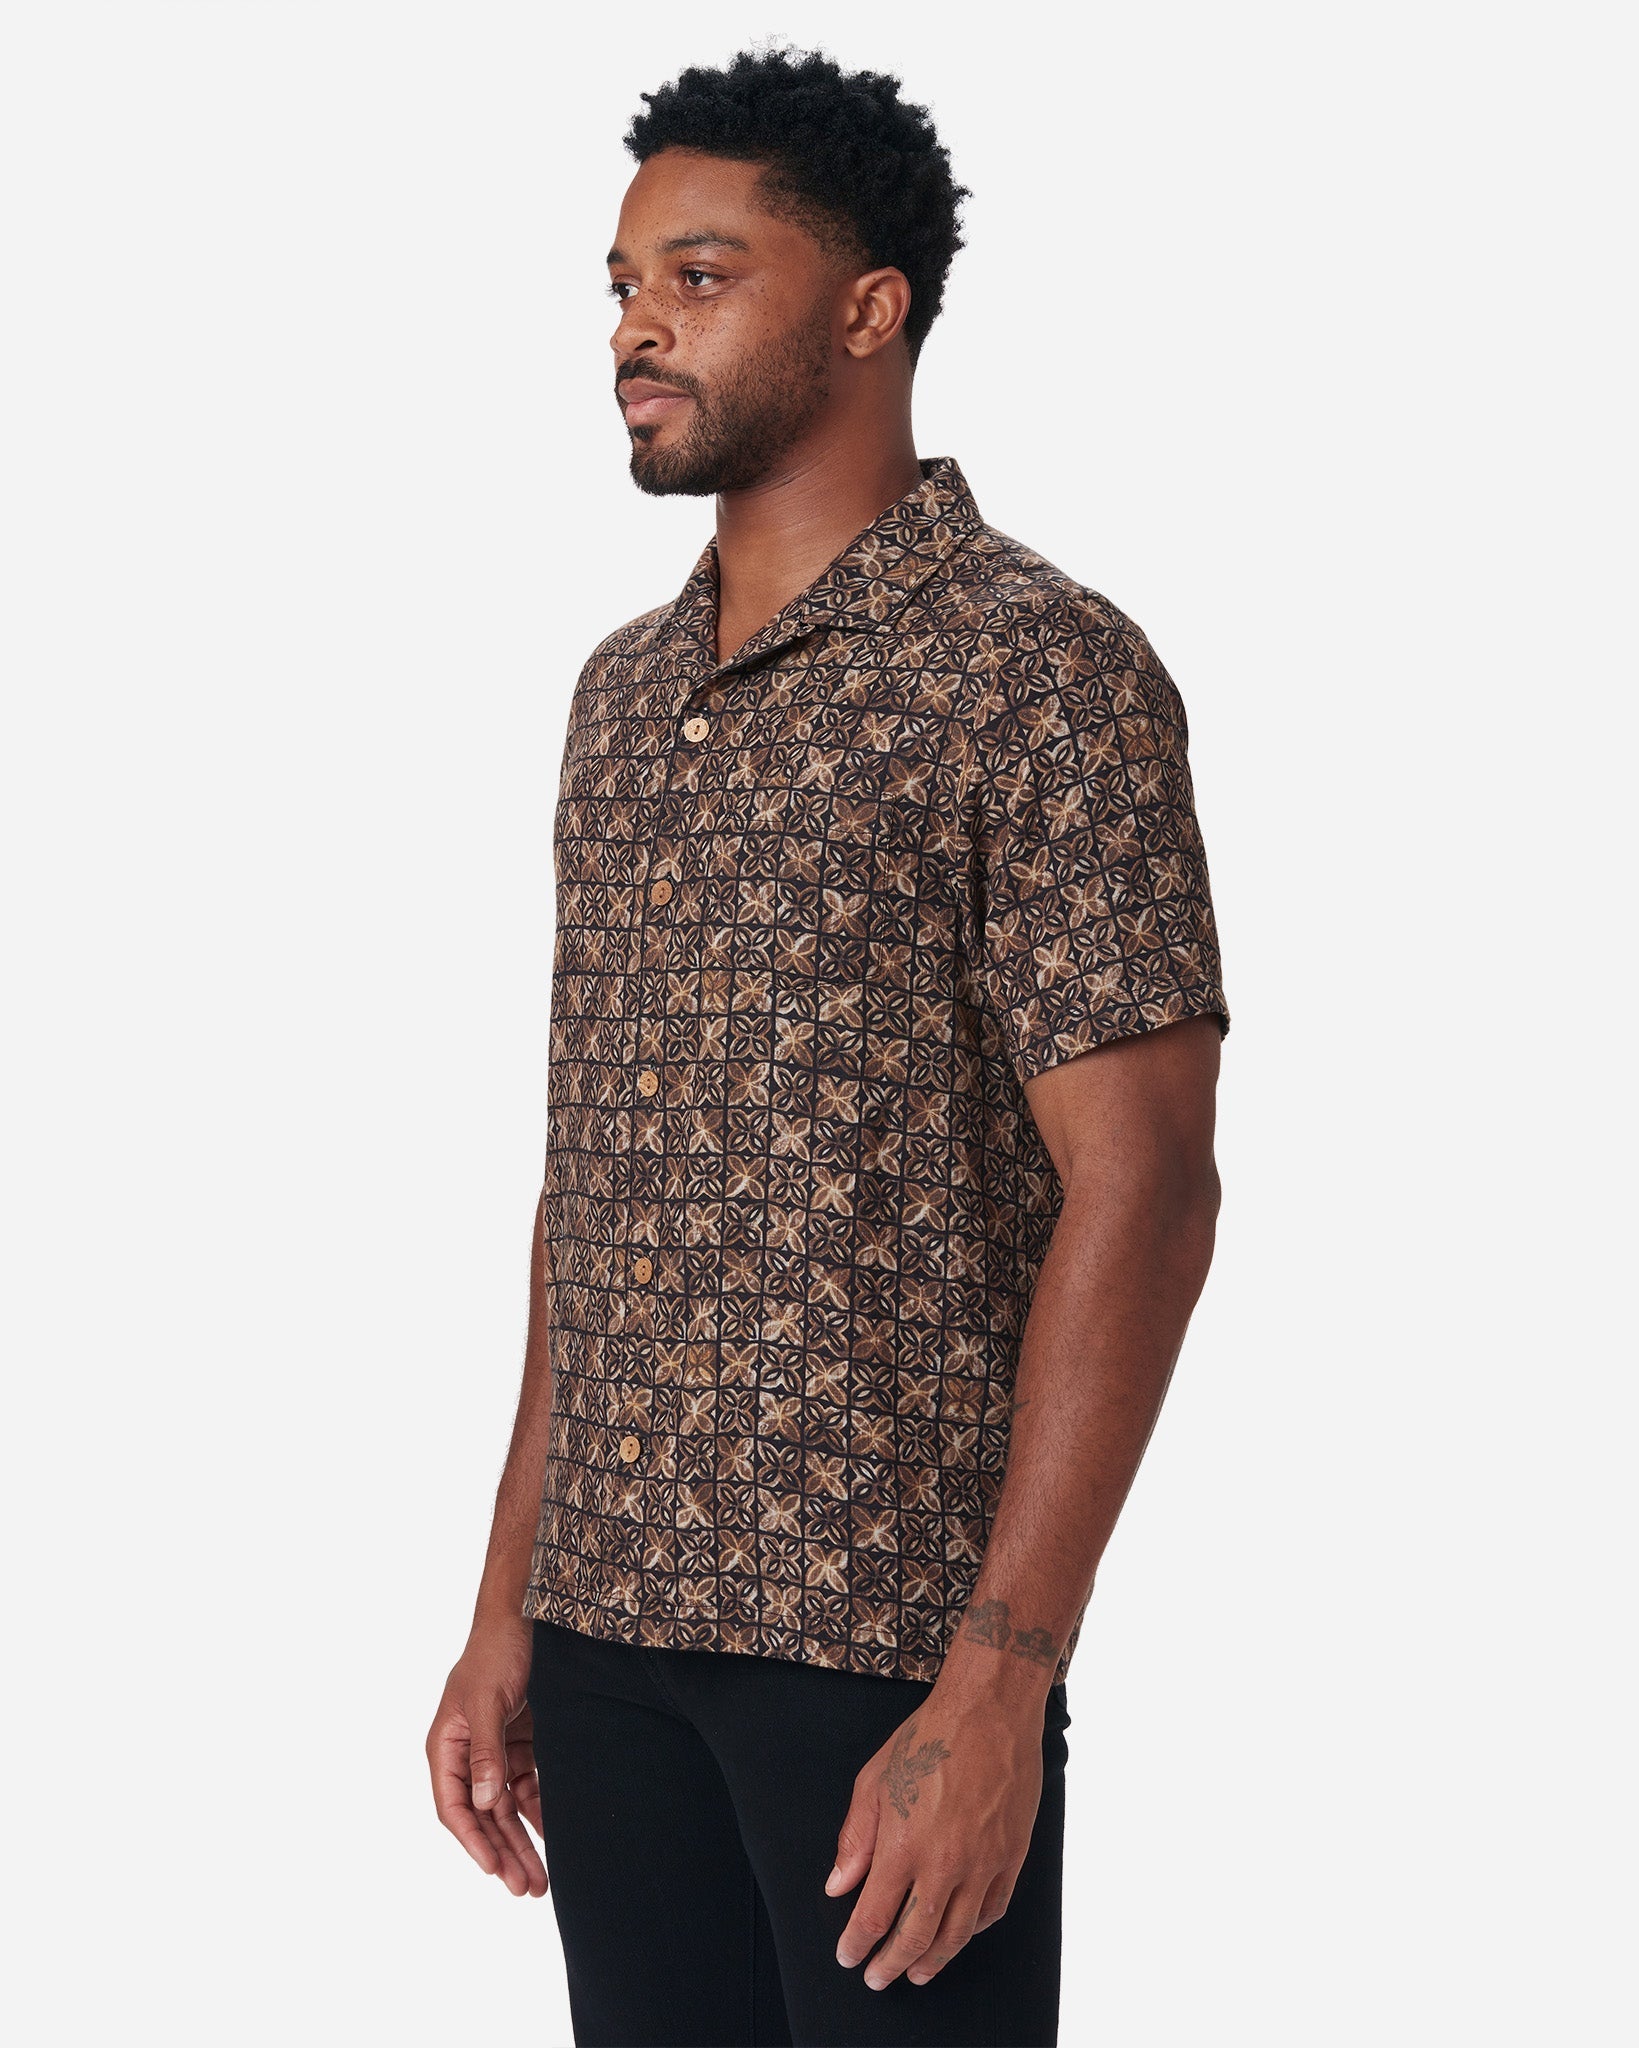 Model with a front and rightward gaze wearing Ace Rivington "Vintage Tile" gold, brown, and black exclusive design camp-collar shirt with coconut buttons and doubles-gauze soft-textured cotton fabric and a pair of black Ace Rivington denim jeans